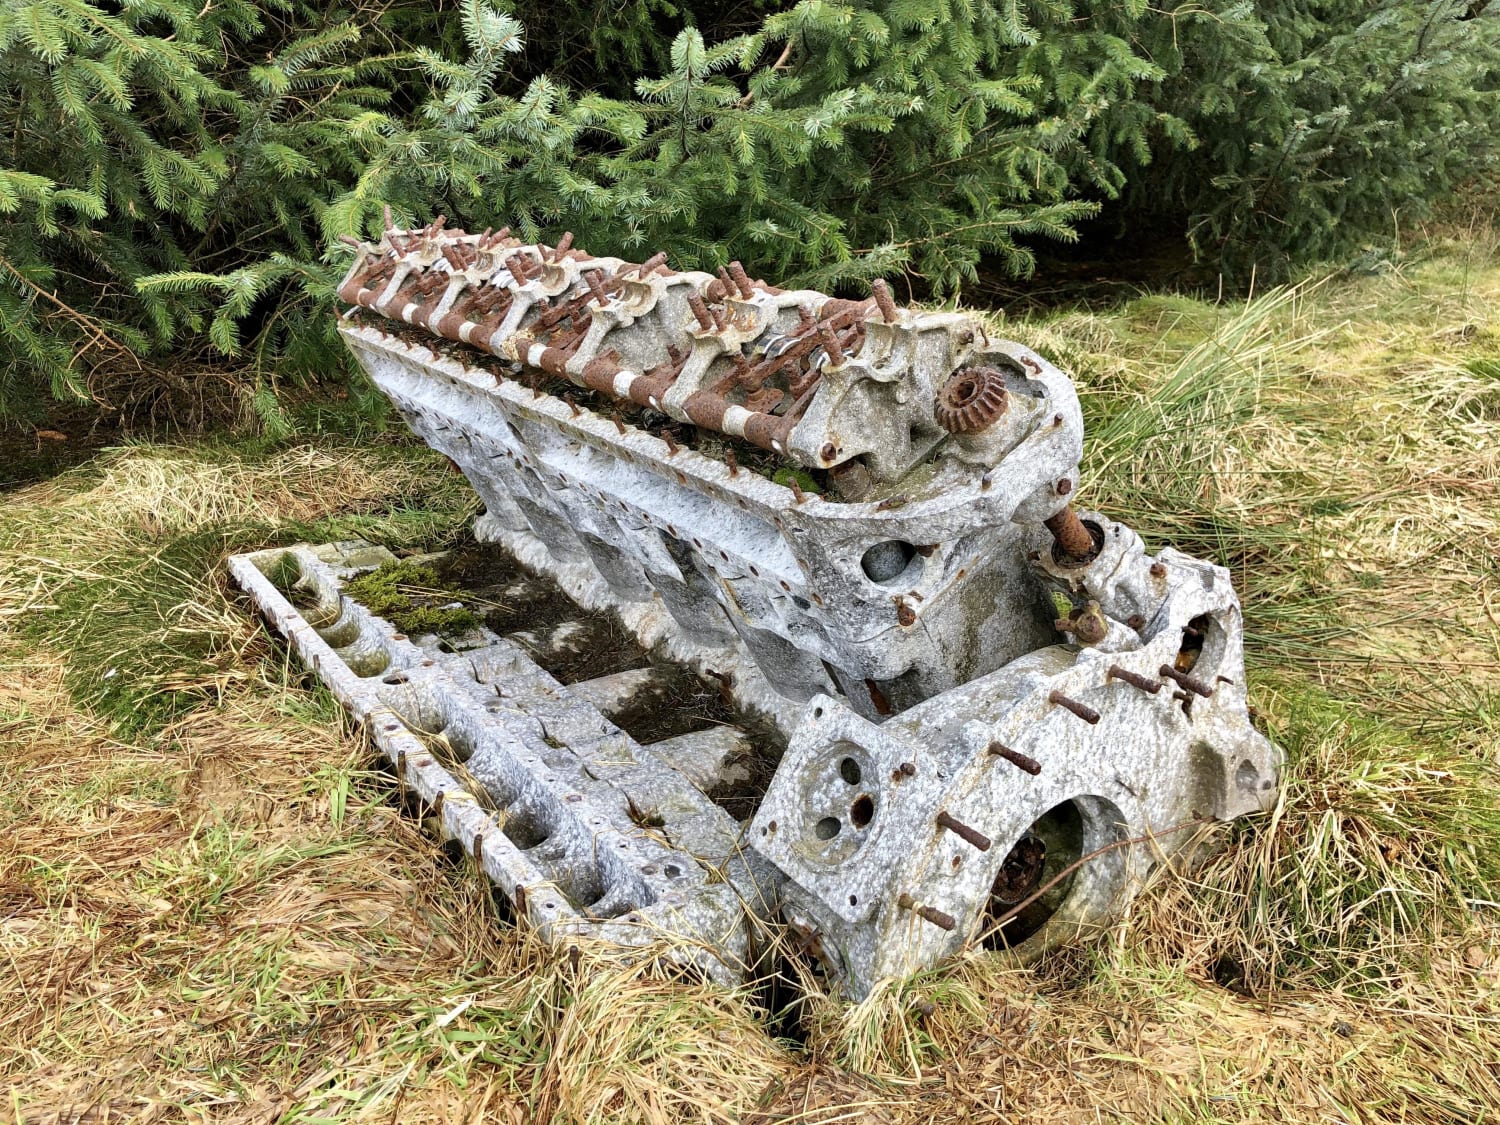 Rolls Royce Griffon V12. It’s been sat on the hillside for 70 years after a RAF Fairey Firefly crashed there.